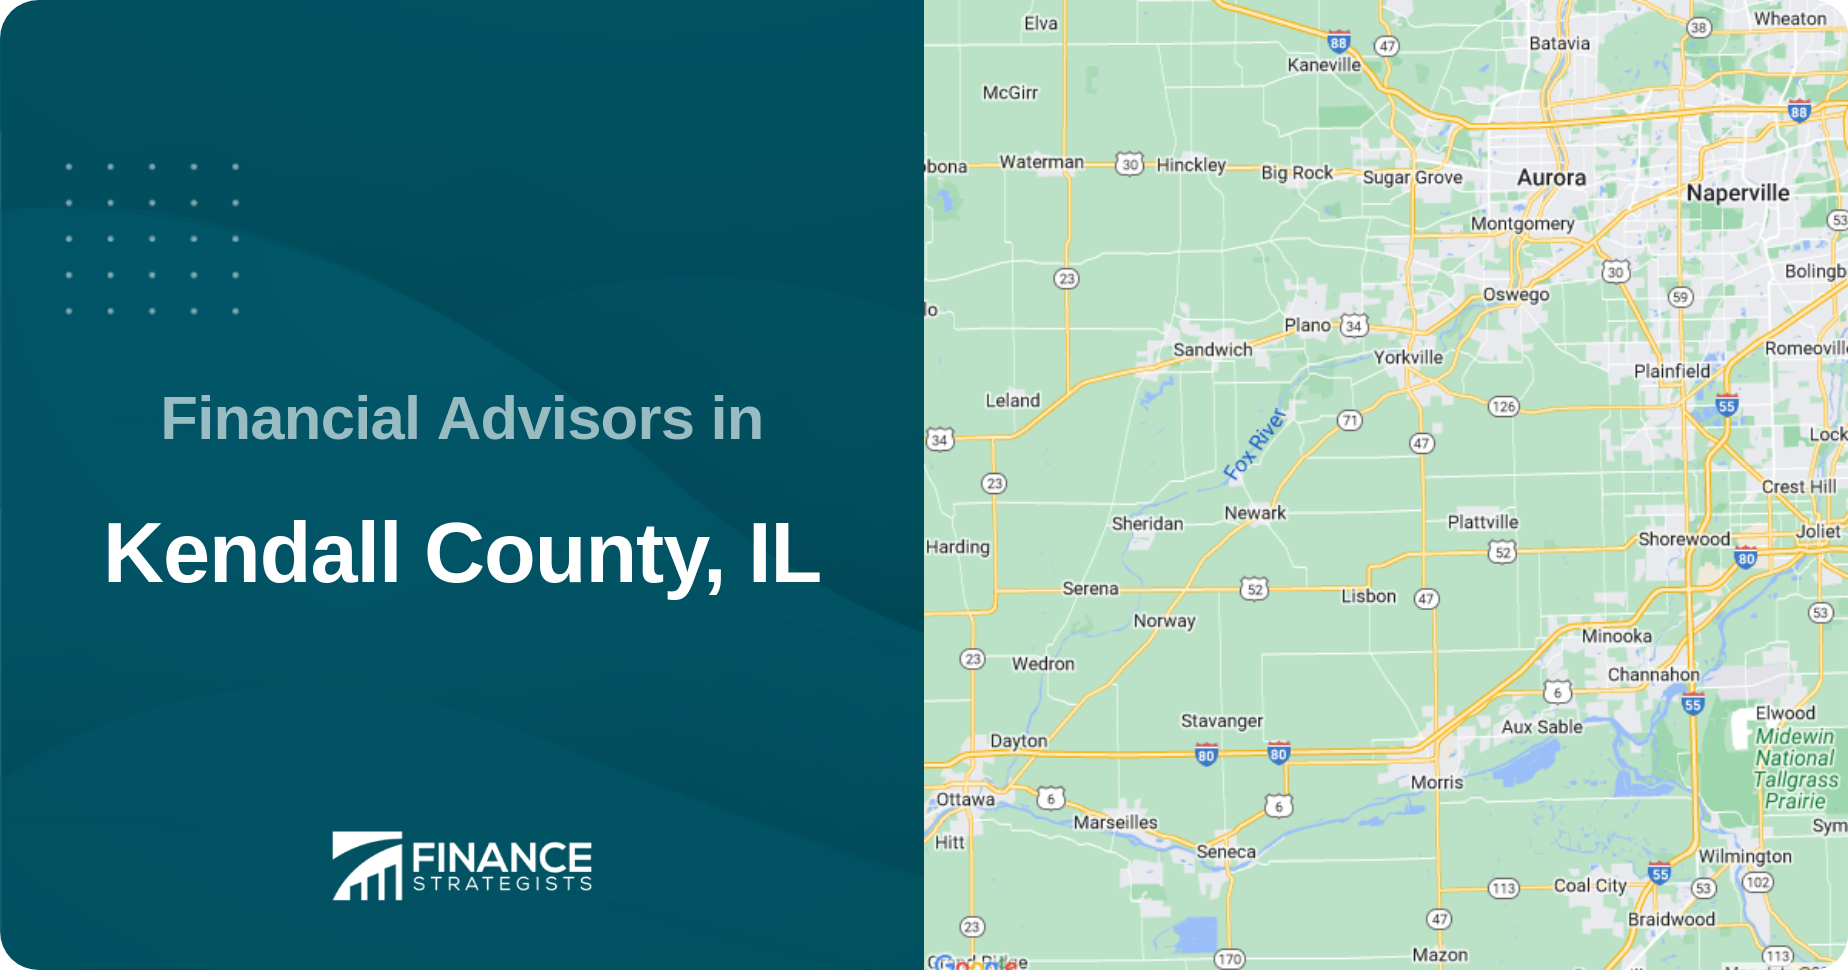 Financial Advisors in Kendall County, IL